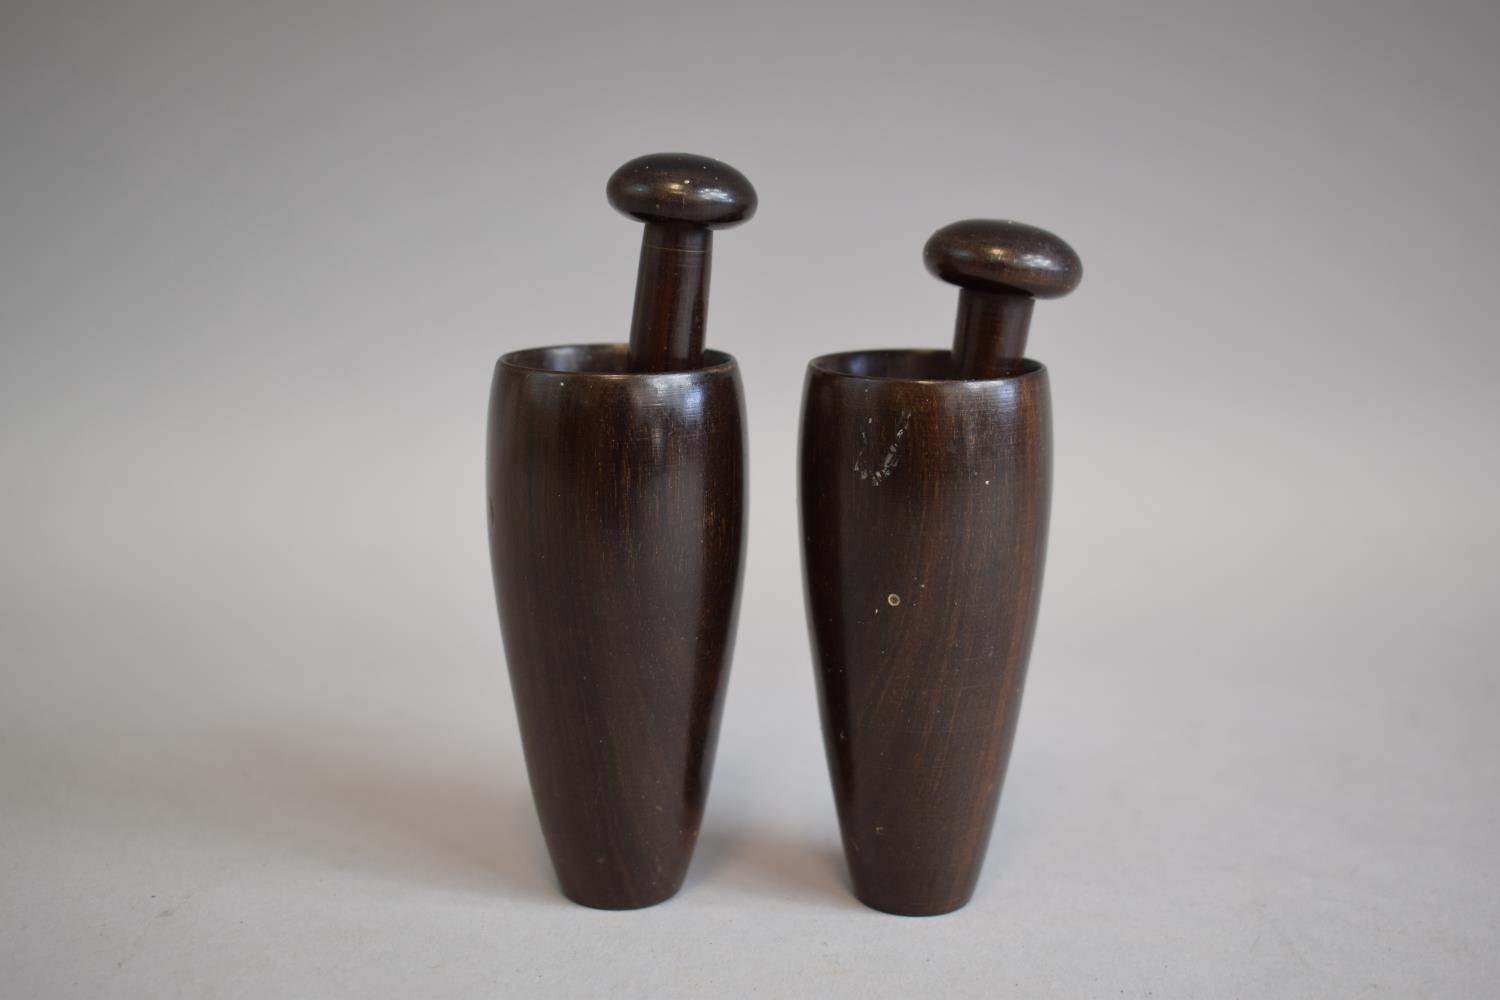 A Pair of Small 19th Century Lignum Vitae Pestles and Mortars. Mortars 8cms, Pointed Pestles with